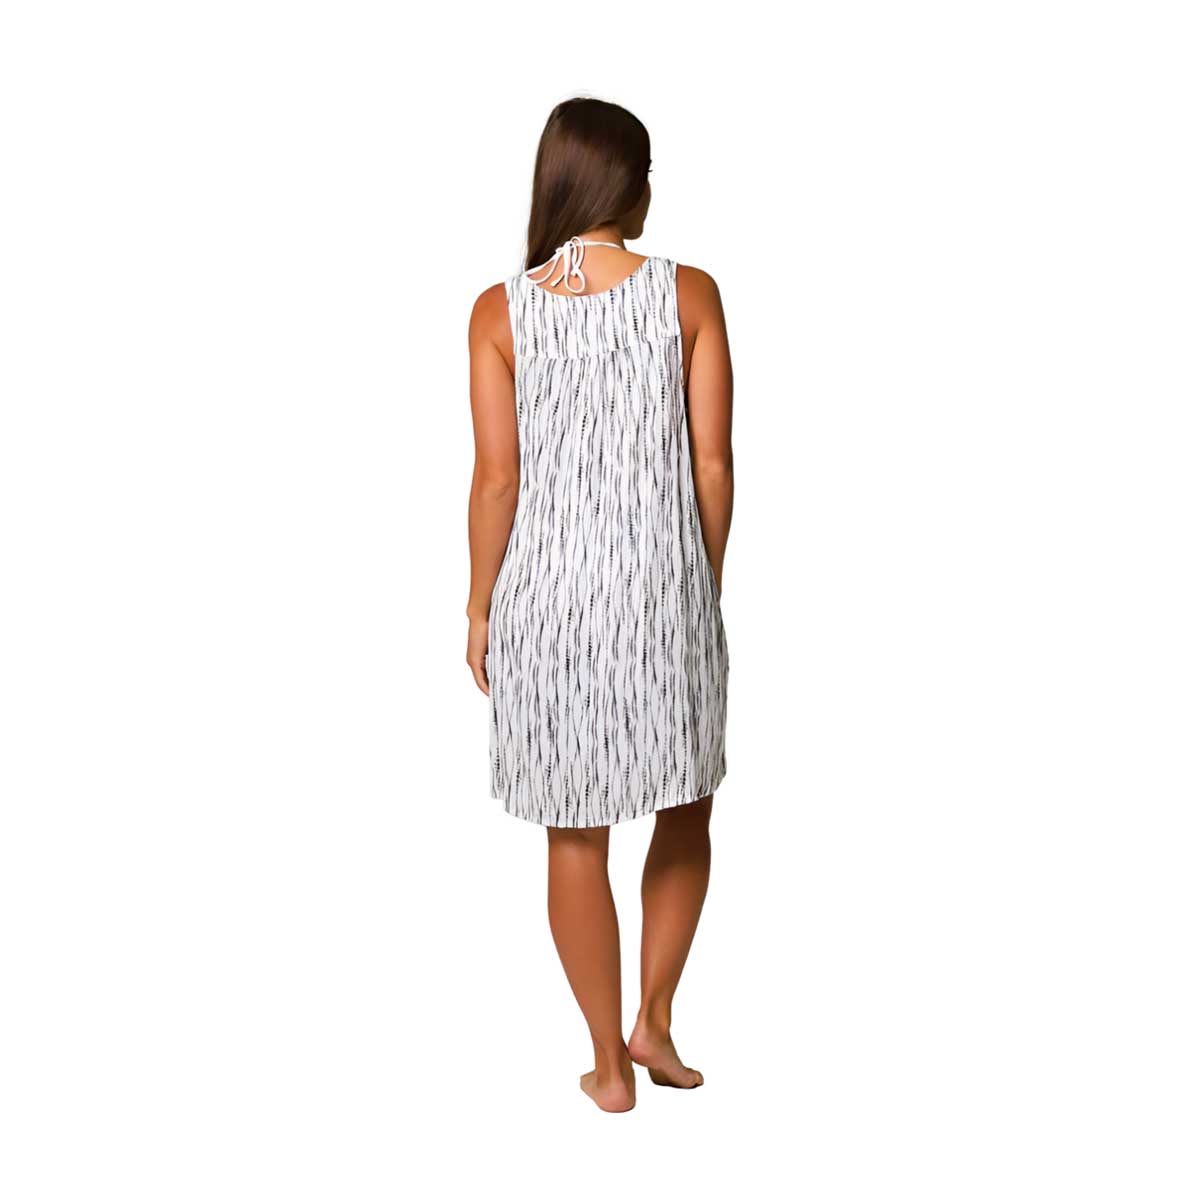 J.Valdi: Abalone Button Down Dress Cover-Up